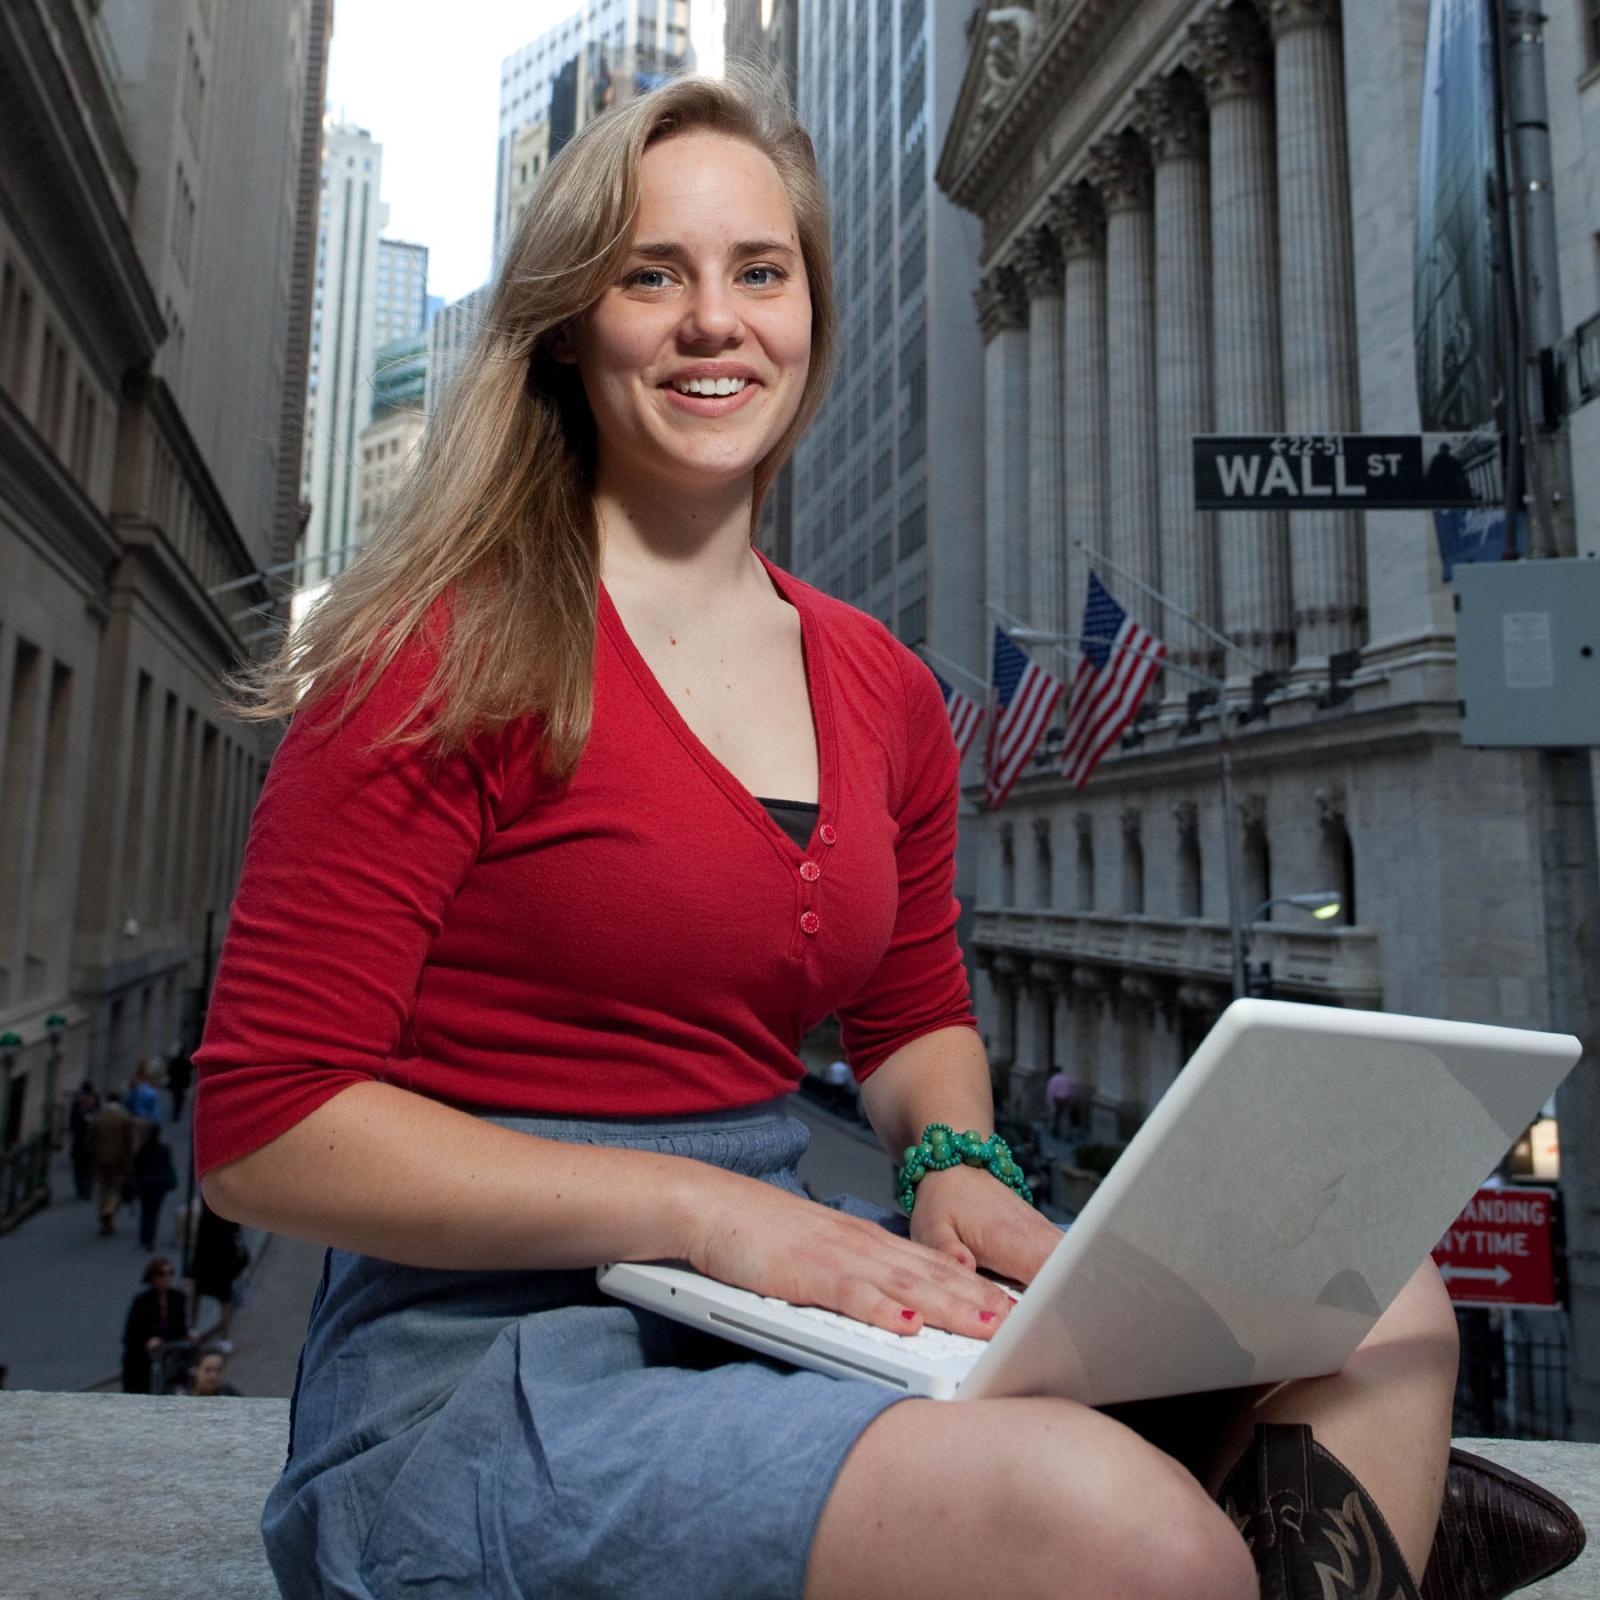 Lubin student sitting with laptop on Wall Street near the New York City Campus